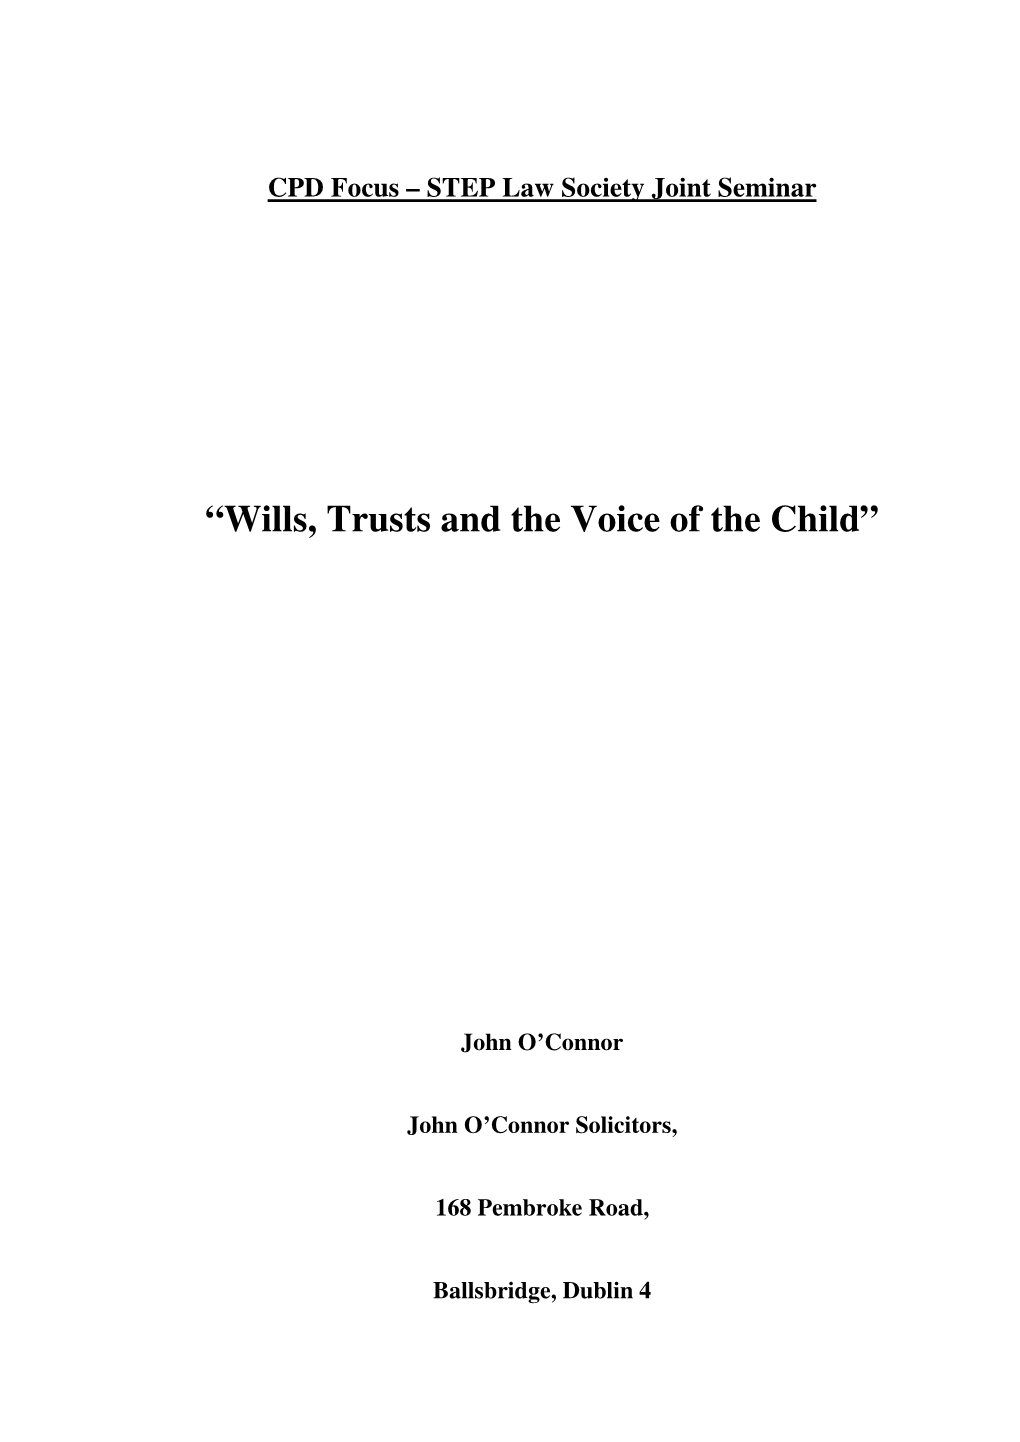 “Wills, Trusts and the Voice of the Child”